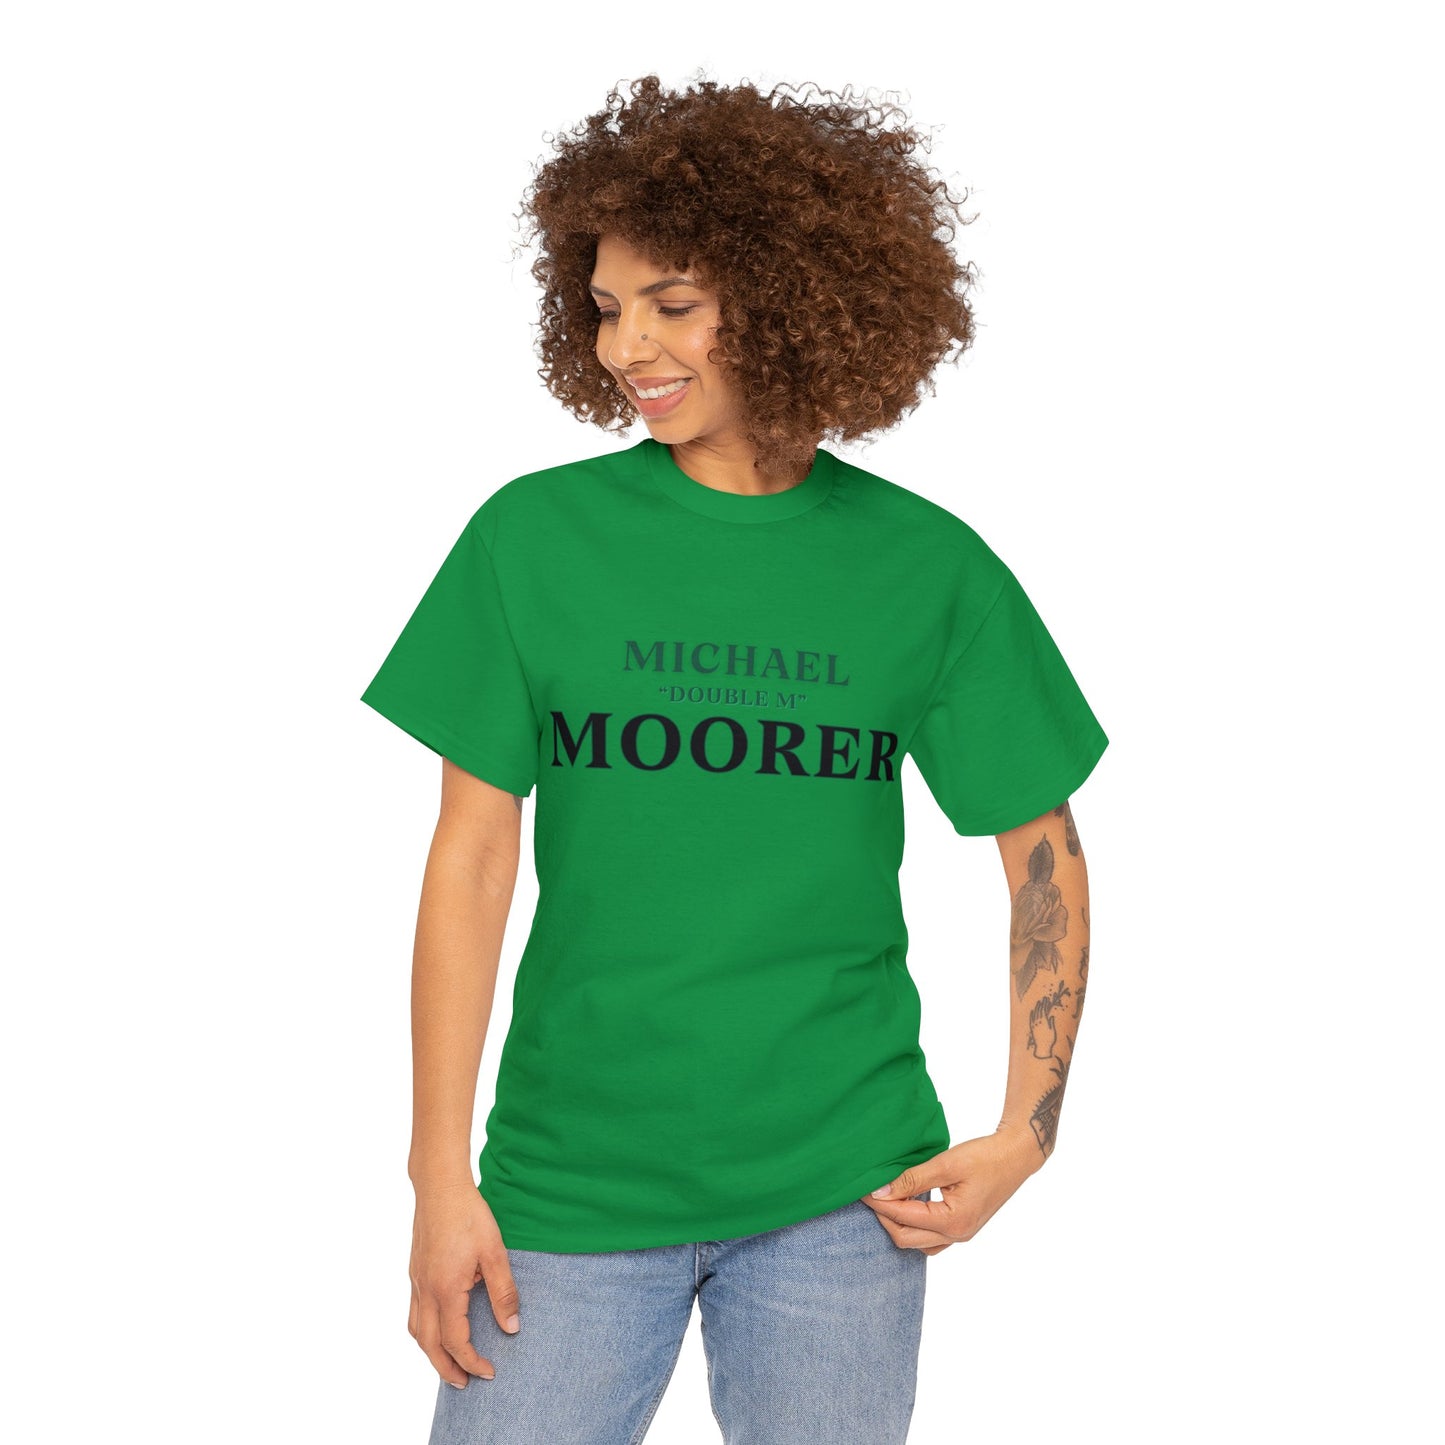 MM T-Shirt (Be Moorer Special Collection)